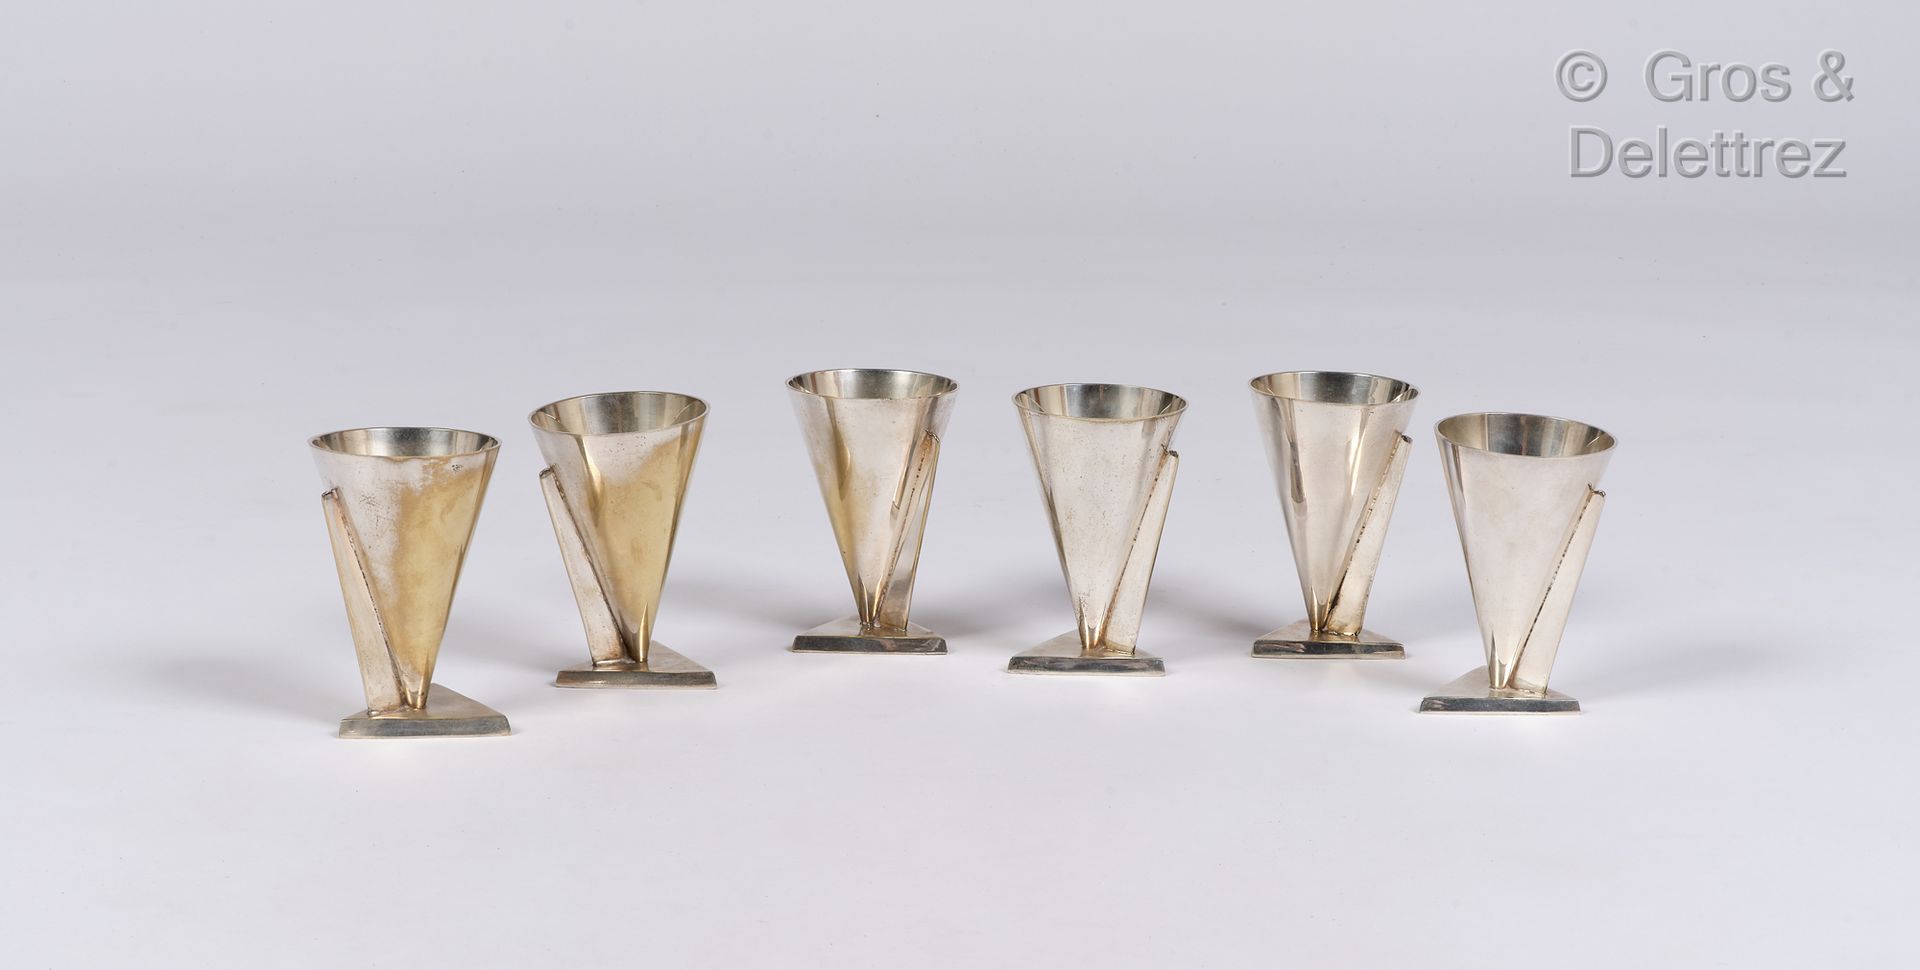 Null DESNY

Suite of six silver-plated metal goblets

H : 11,5 cm